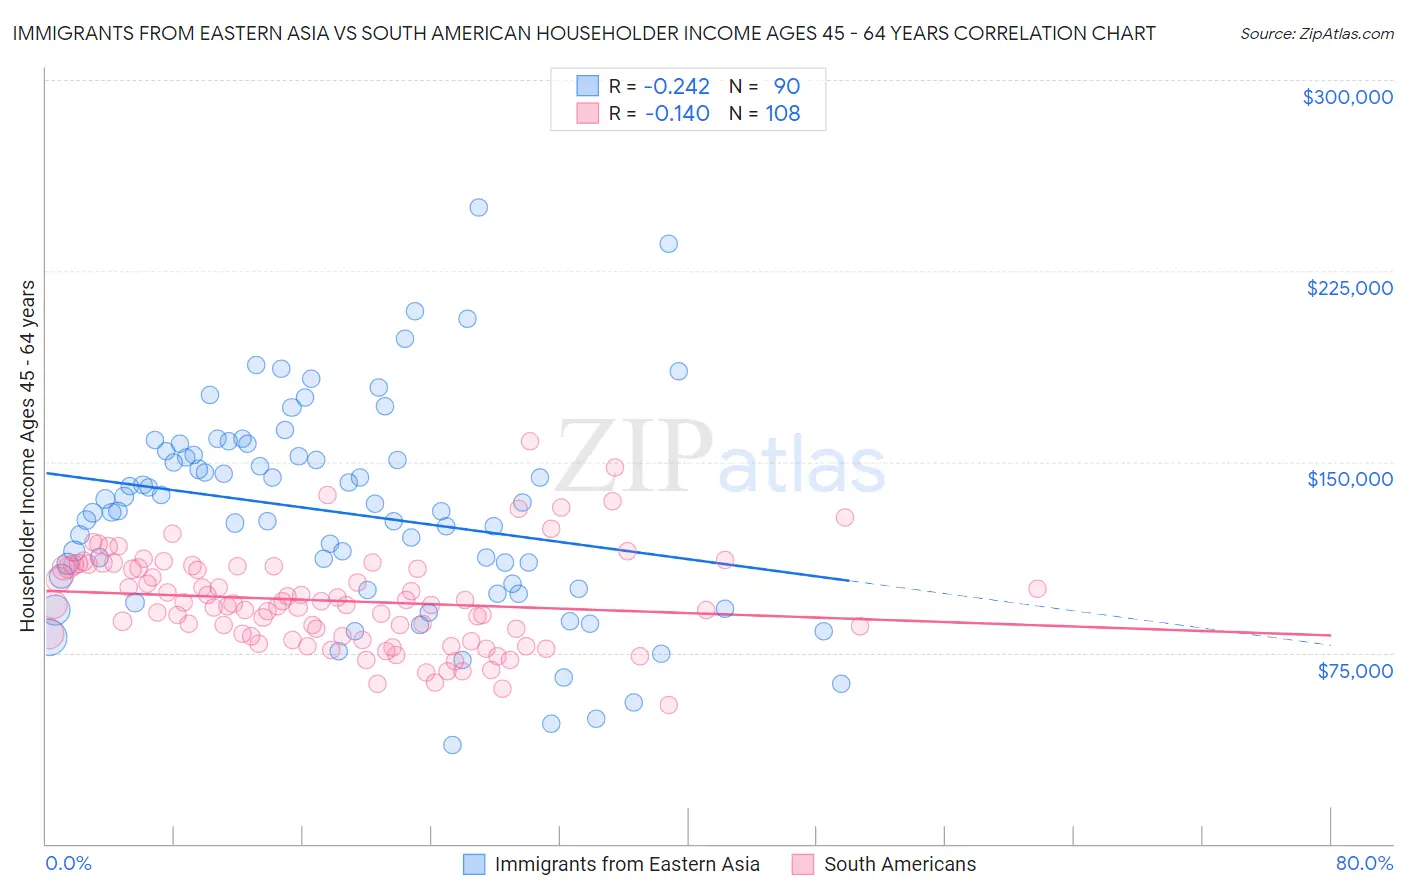 Immigrants from Eastern Asia vs South American Householder Income Ages 45 - 64 years